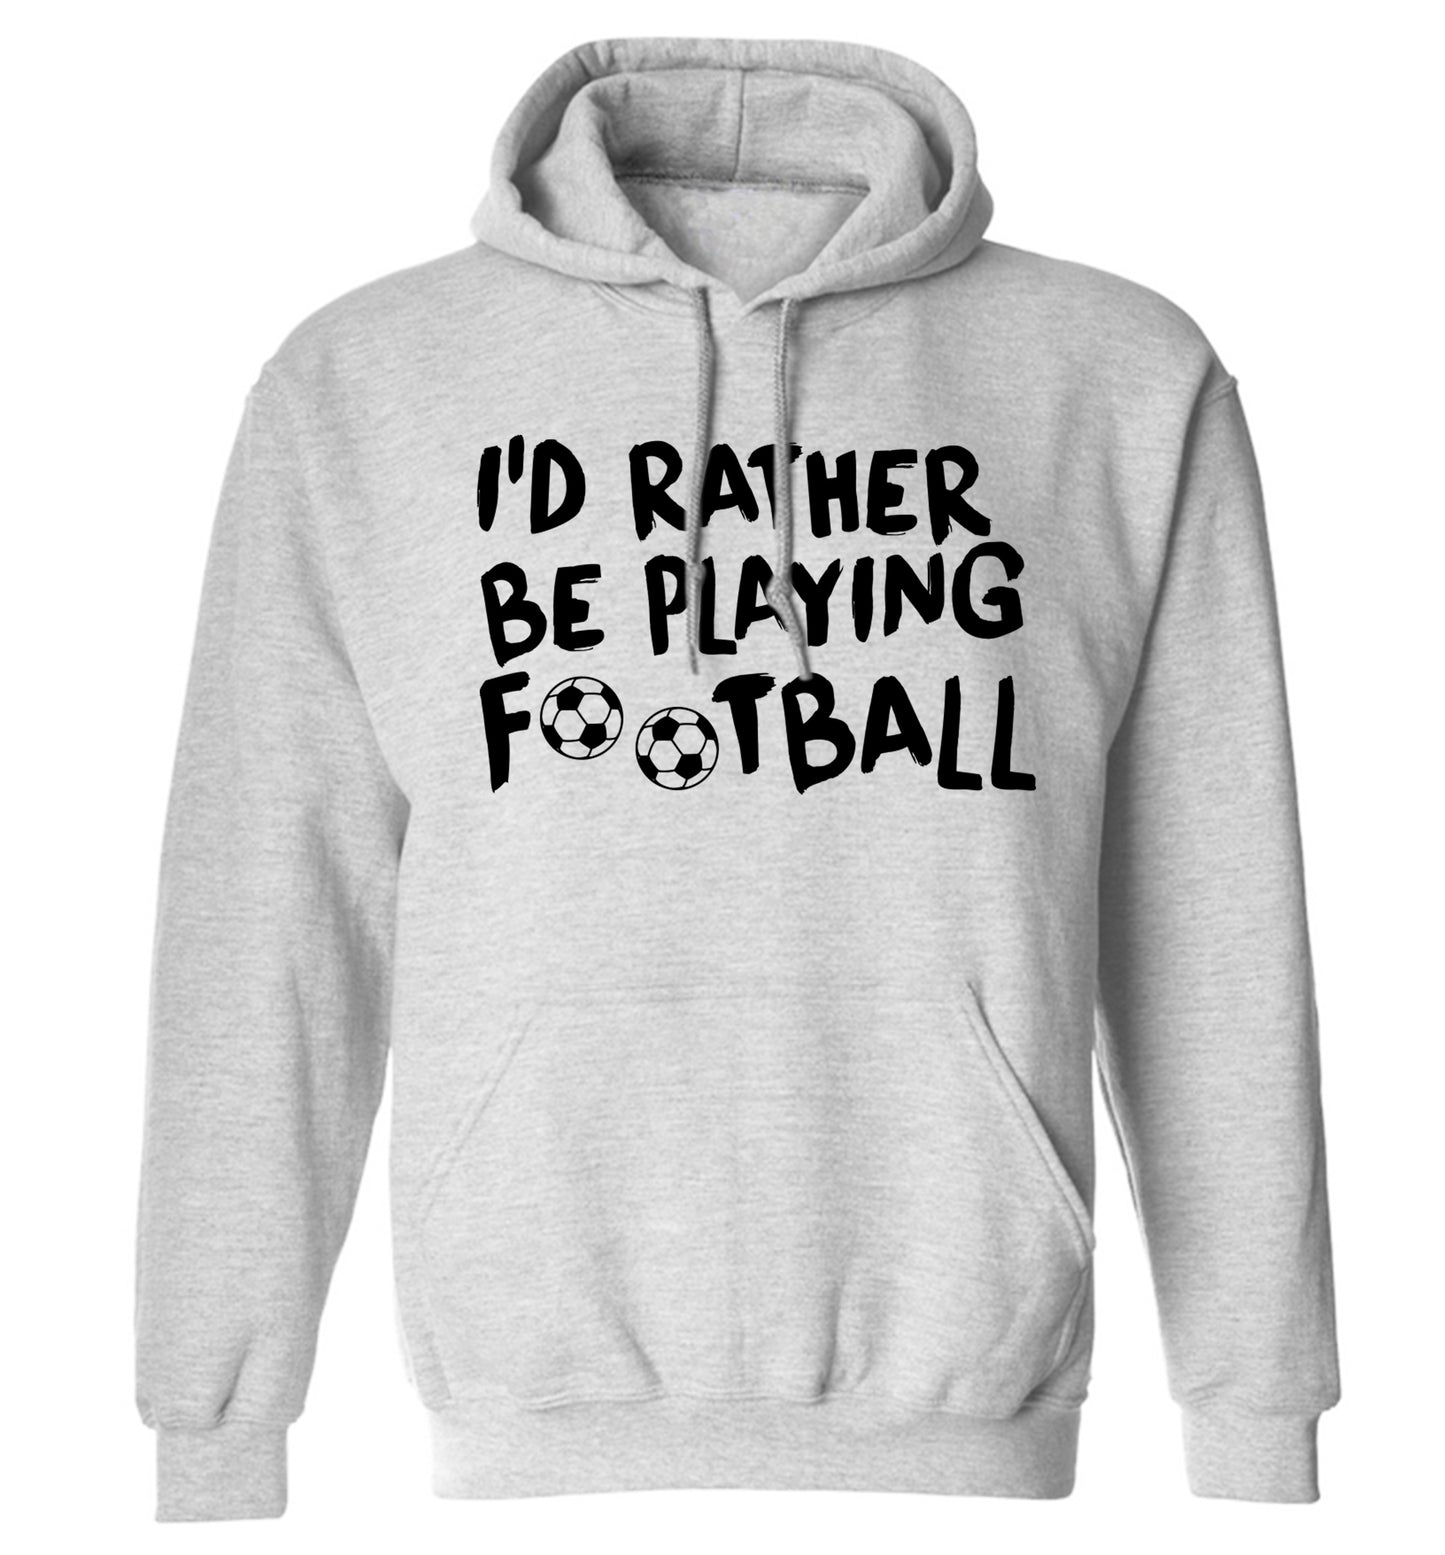 I'd rather be playing football adults unisexgrey hoodie 2XL